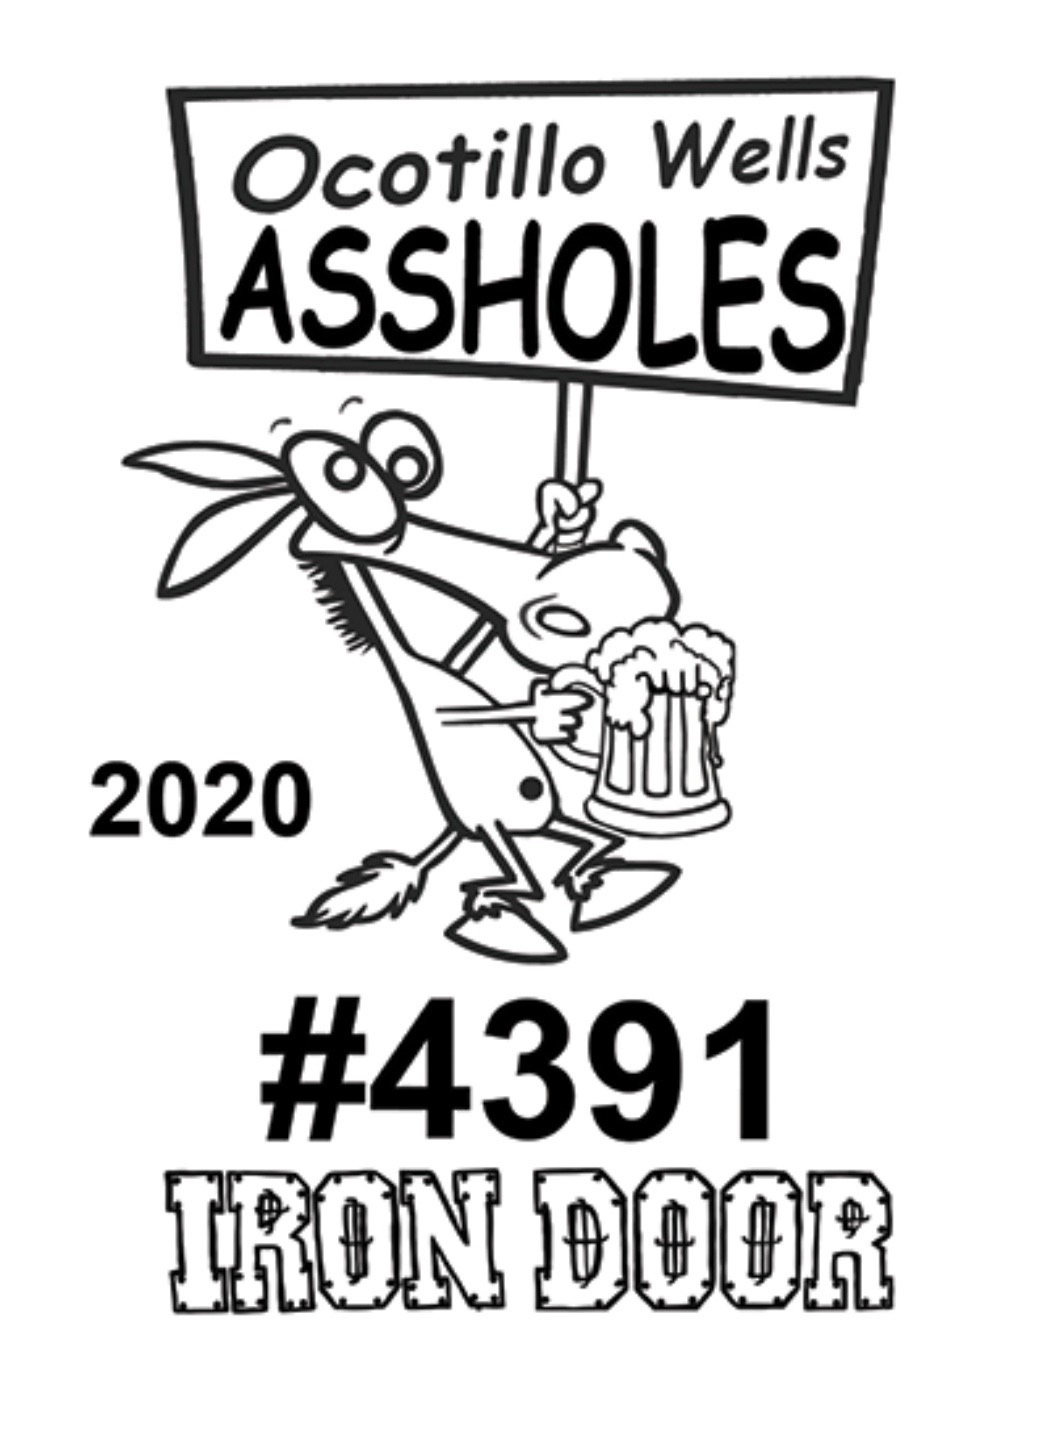 Iron door bar asshole club T-shirts will be available soon!!!